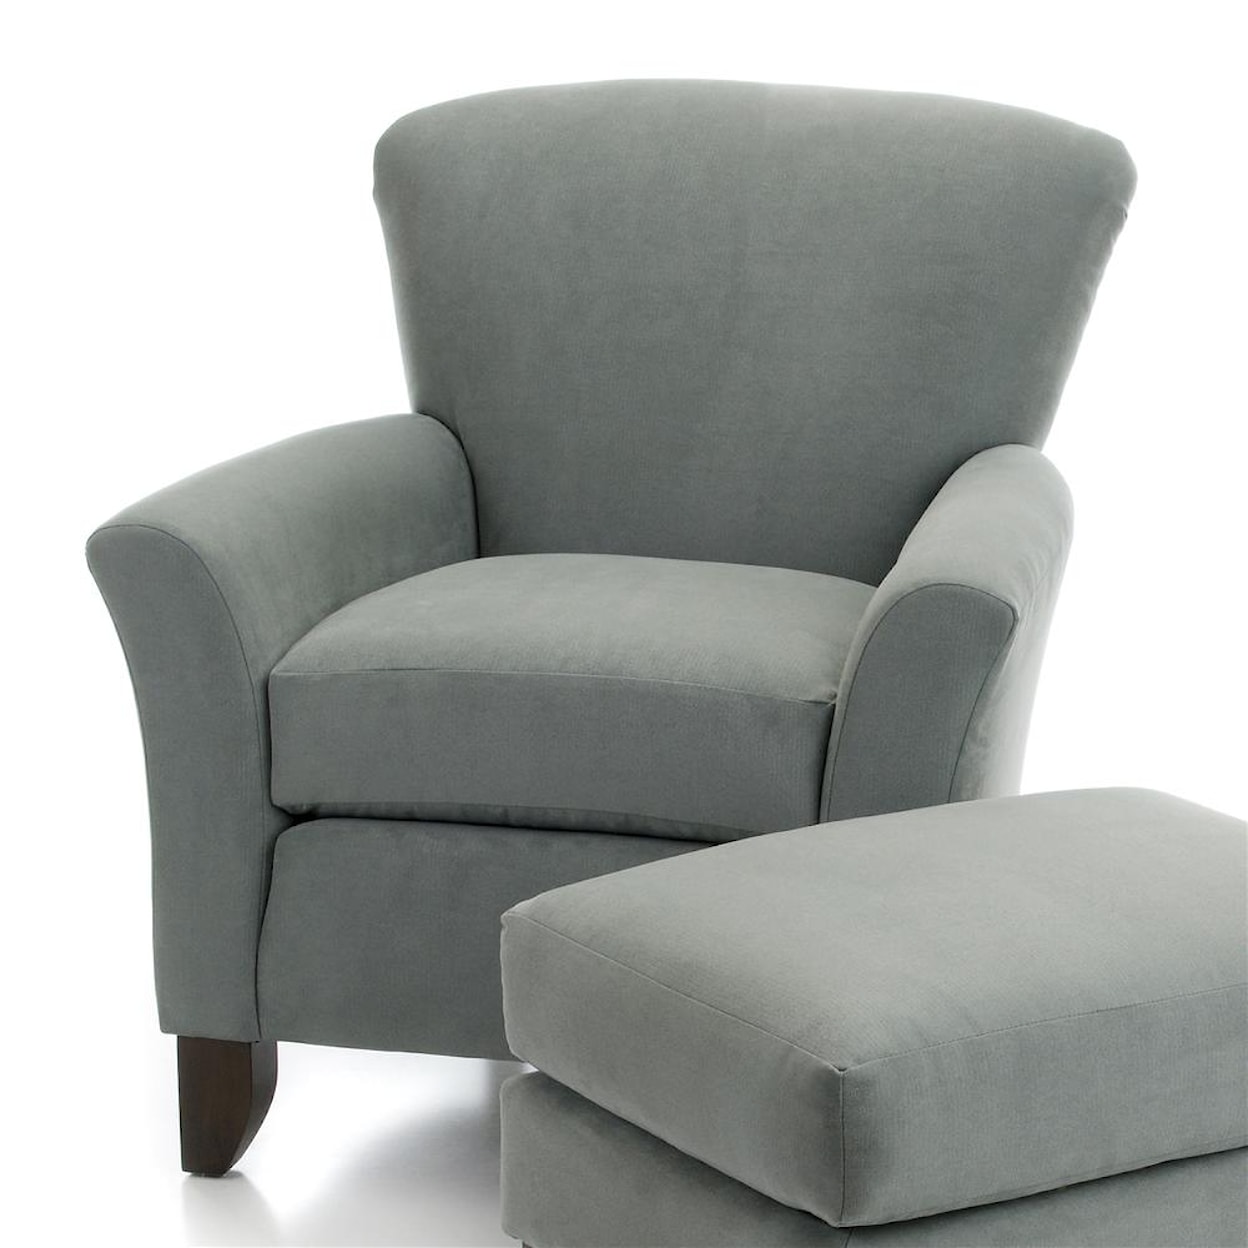 Smith Brothers 919 Upholstered Chair